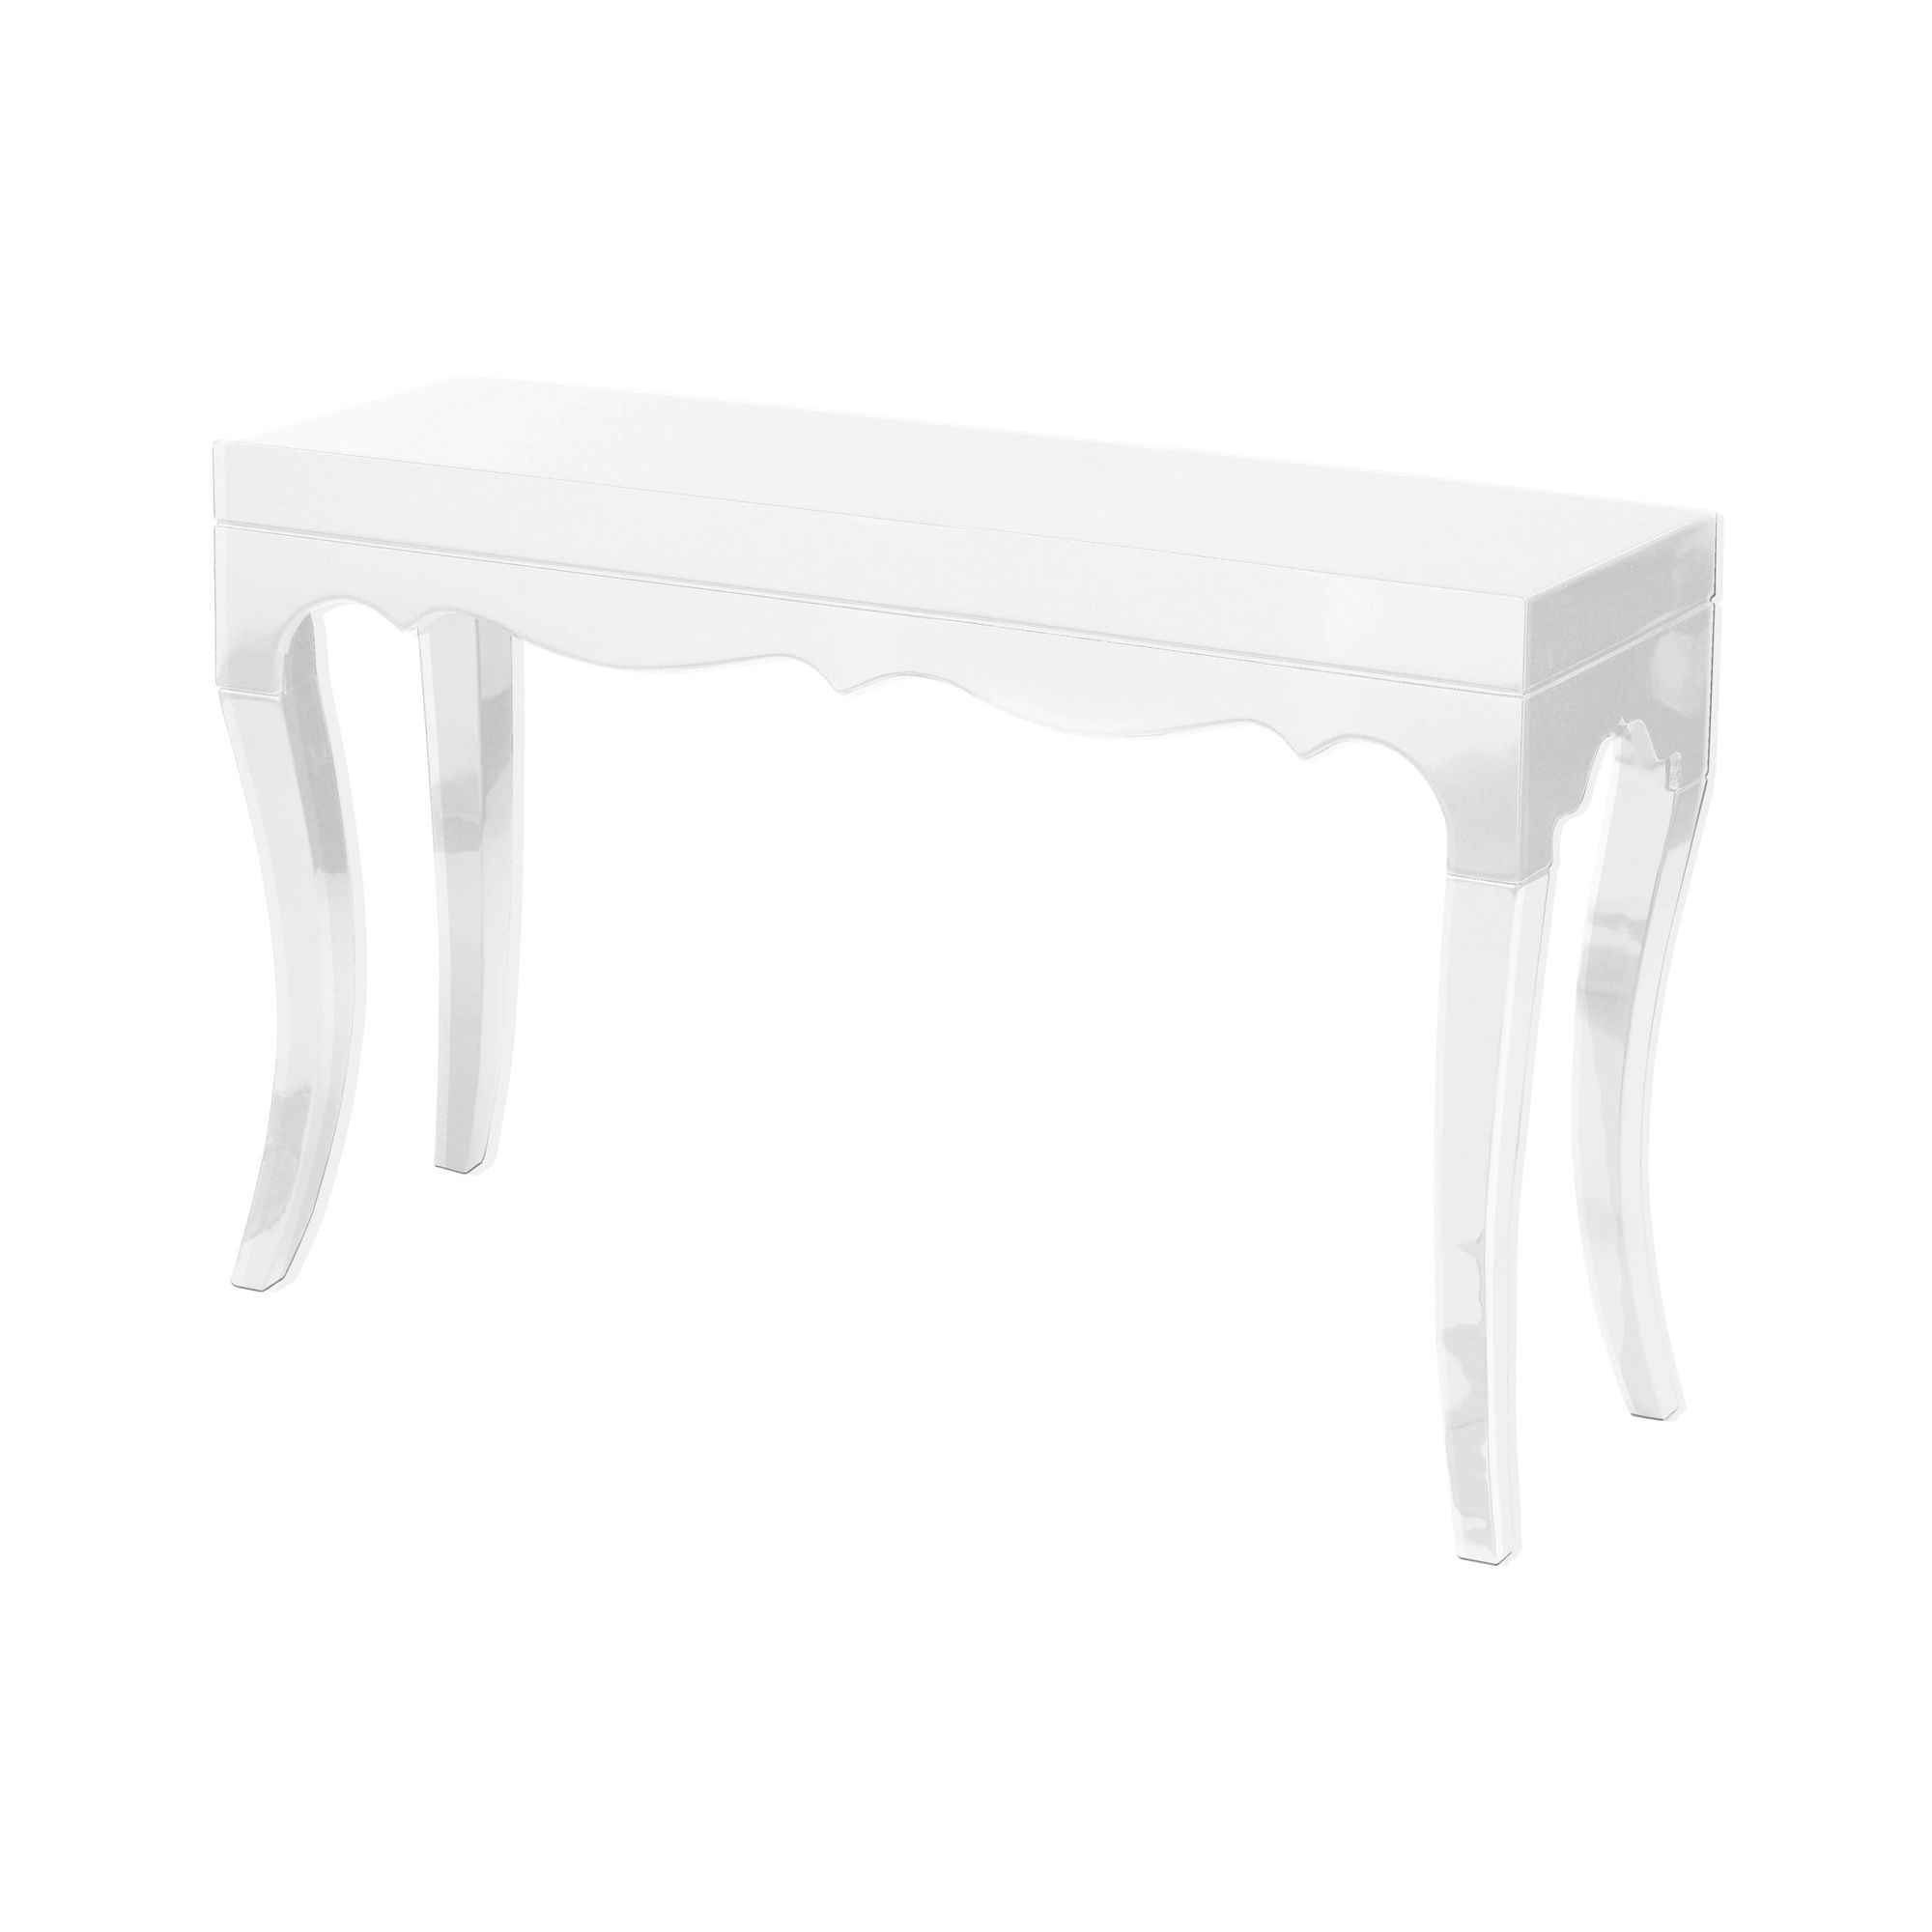 Premier Housewares Roccoco Console Table - White High Gloss at Tesco Direct